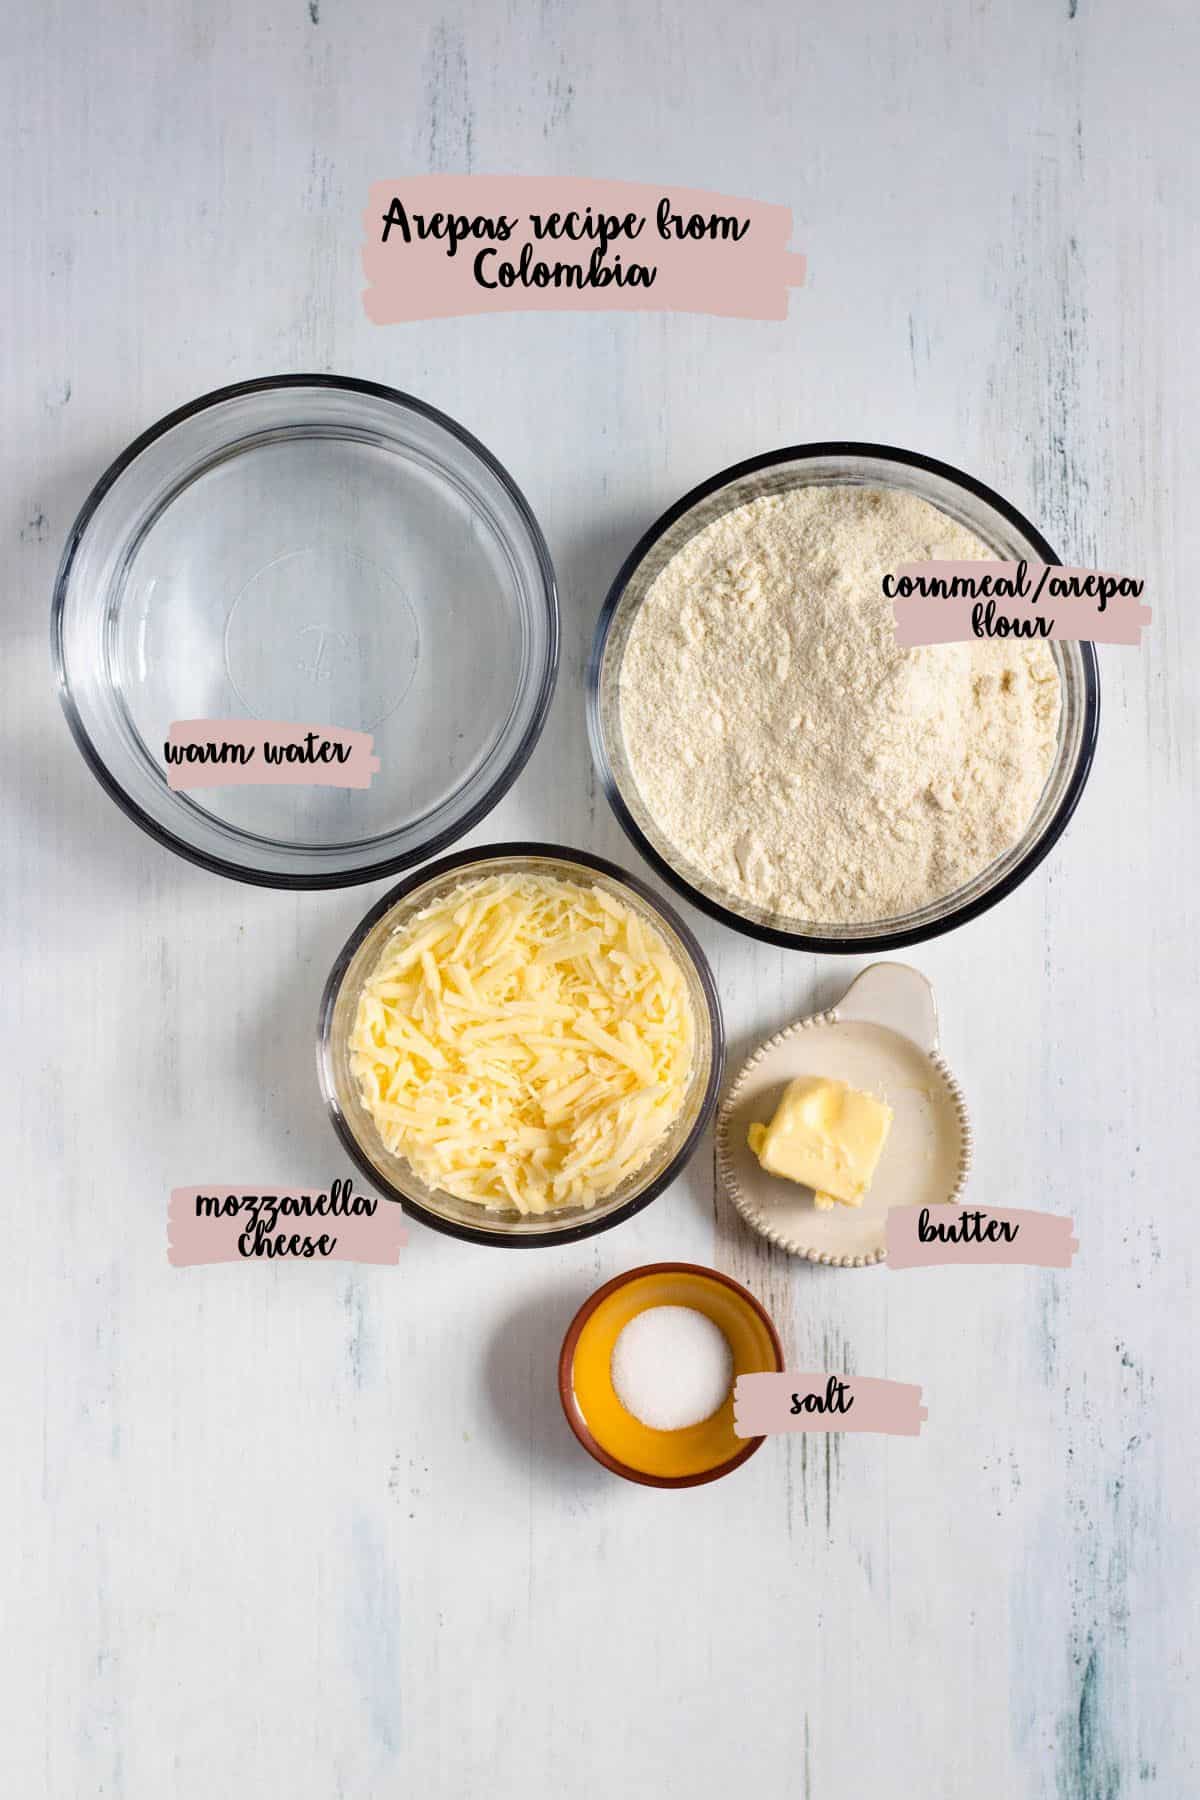 Ingredients shown that are used to prepare arepas recipe from Colombia. 